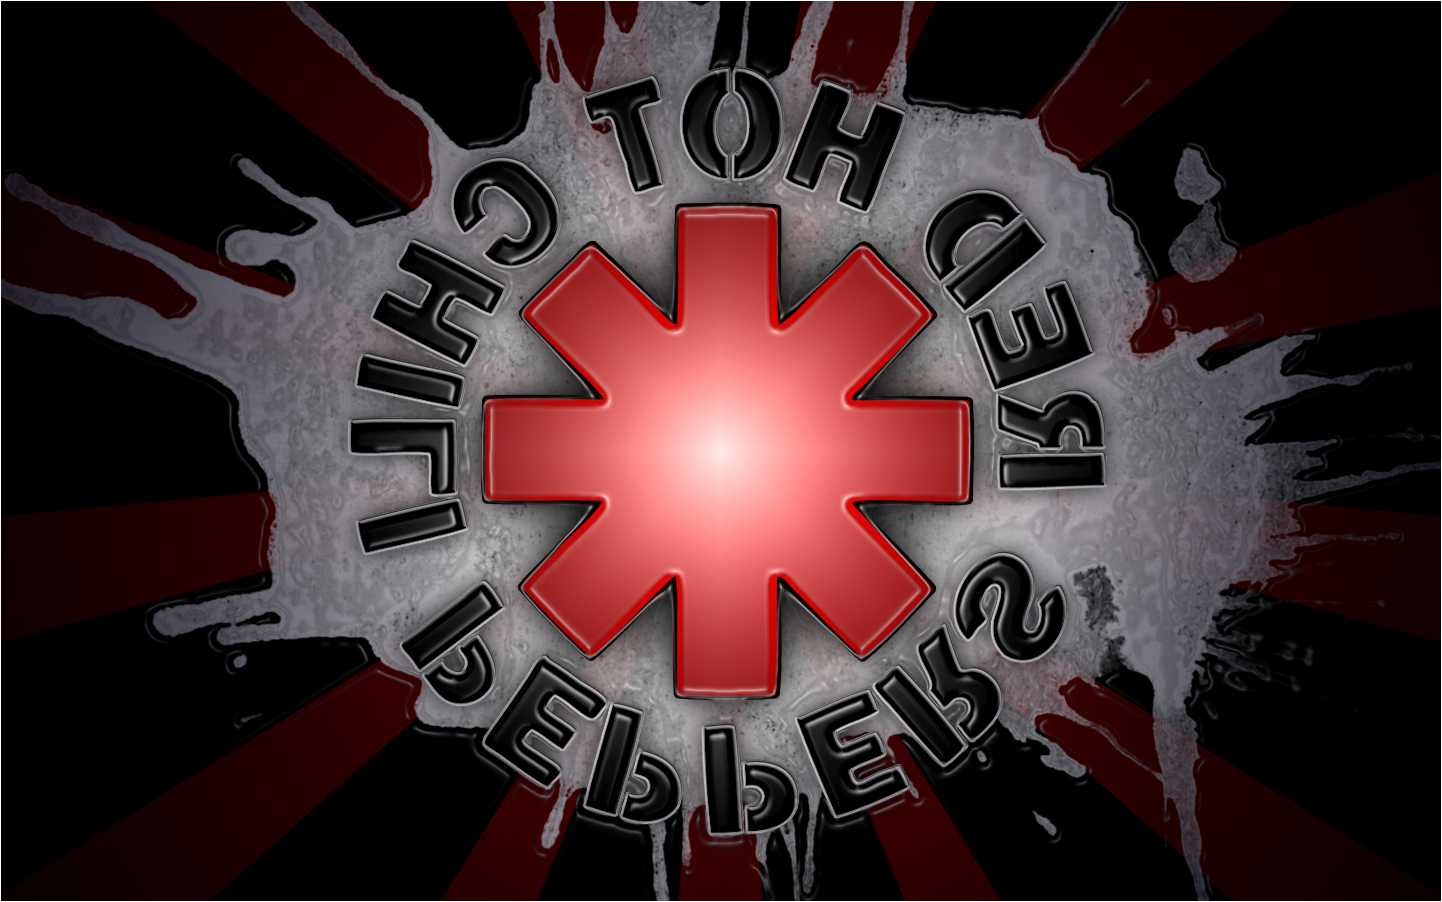 Red Hot Chili Peppers Wallpaper 889 - Graphic Design - 1442x902 Wallpaper -  